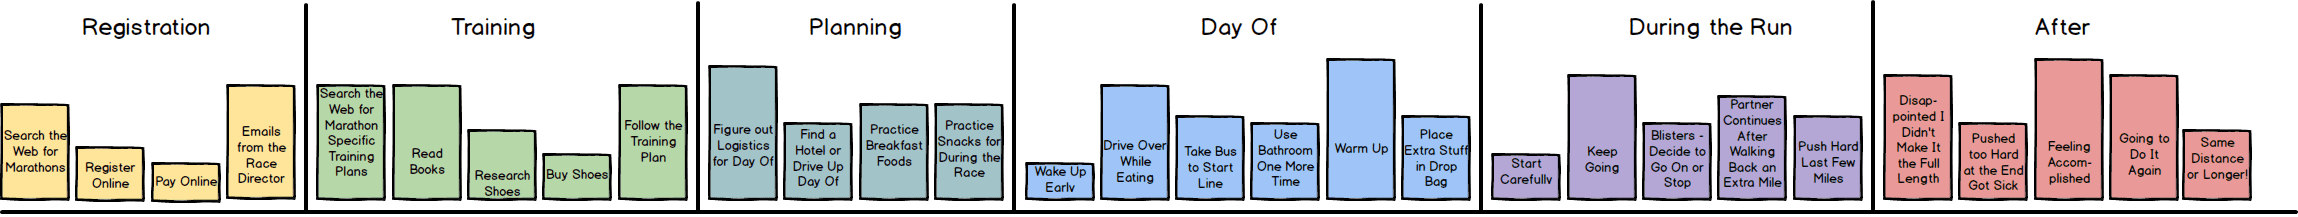 Example mental model showing a runners' stages of Registration, Training, Planning, Day Of, During the Run, and After